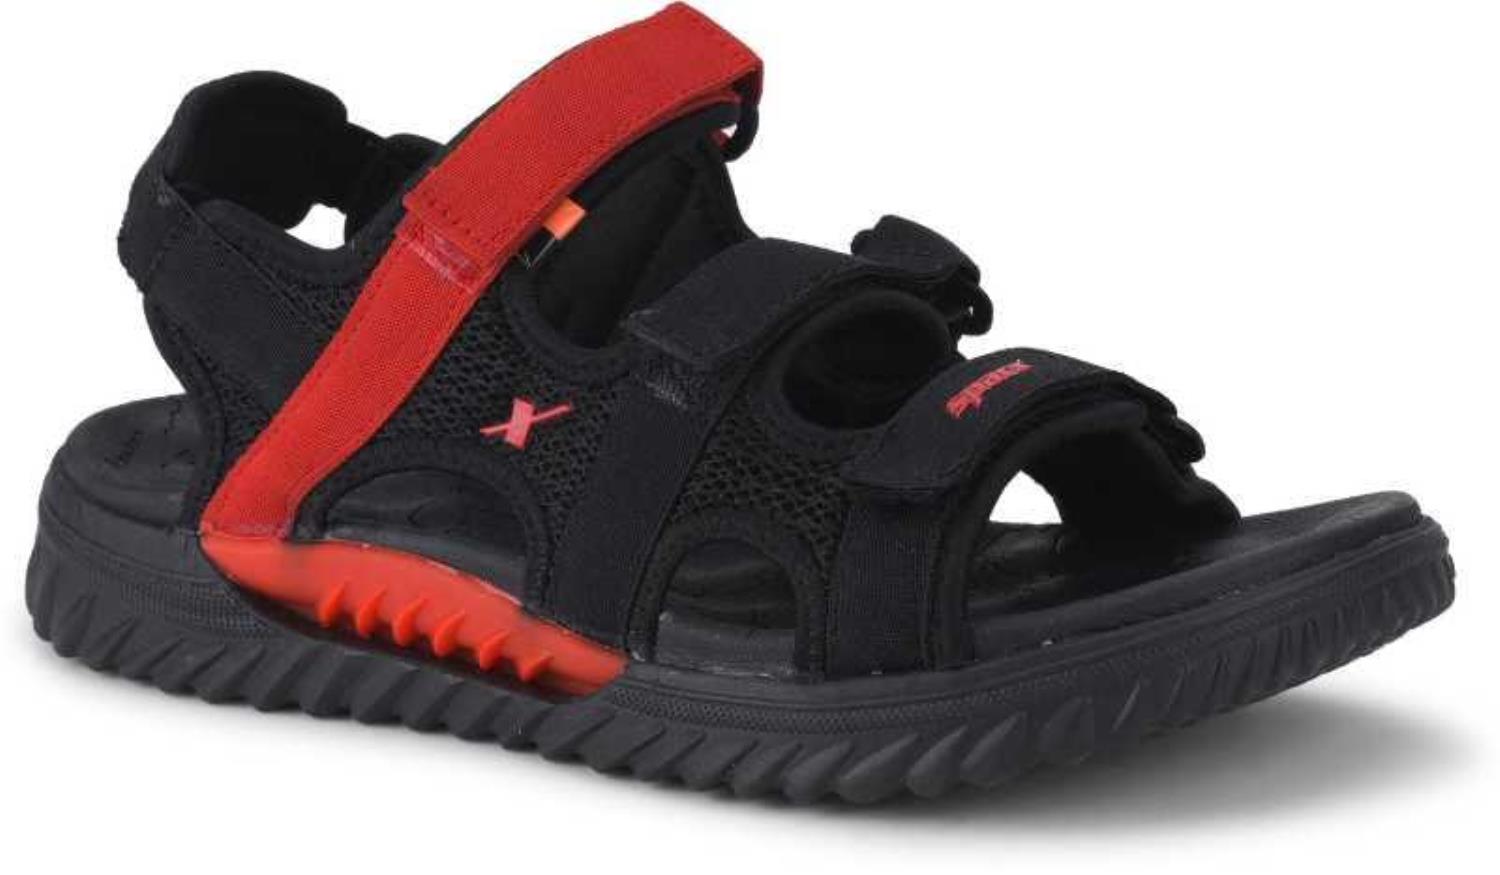 Sparx Men's Black and Red Sandals - 6 UK/India (39.33 EU)(SM-433) :  Amazon.in: Fashion